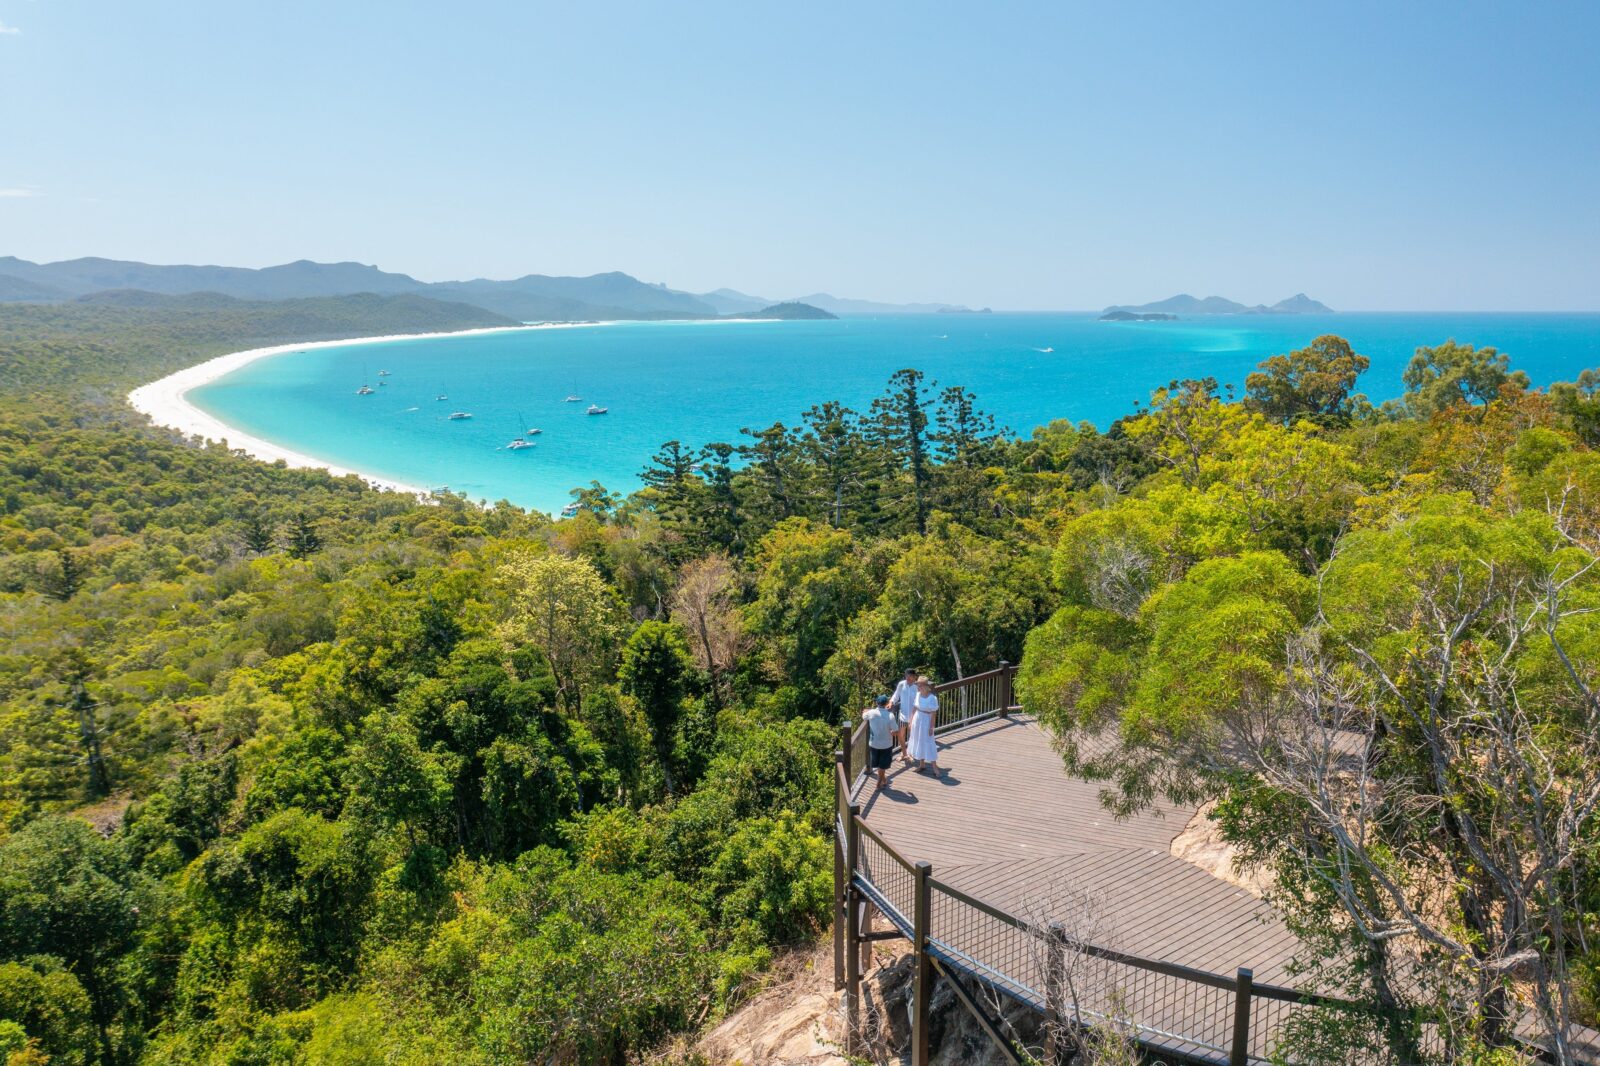 People on a hilltop lookout point overlooking the trees, long stretch of white sandy beach and ocean